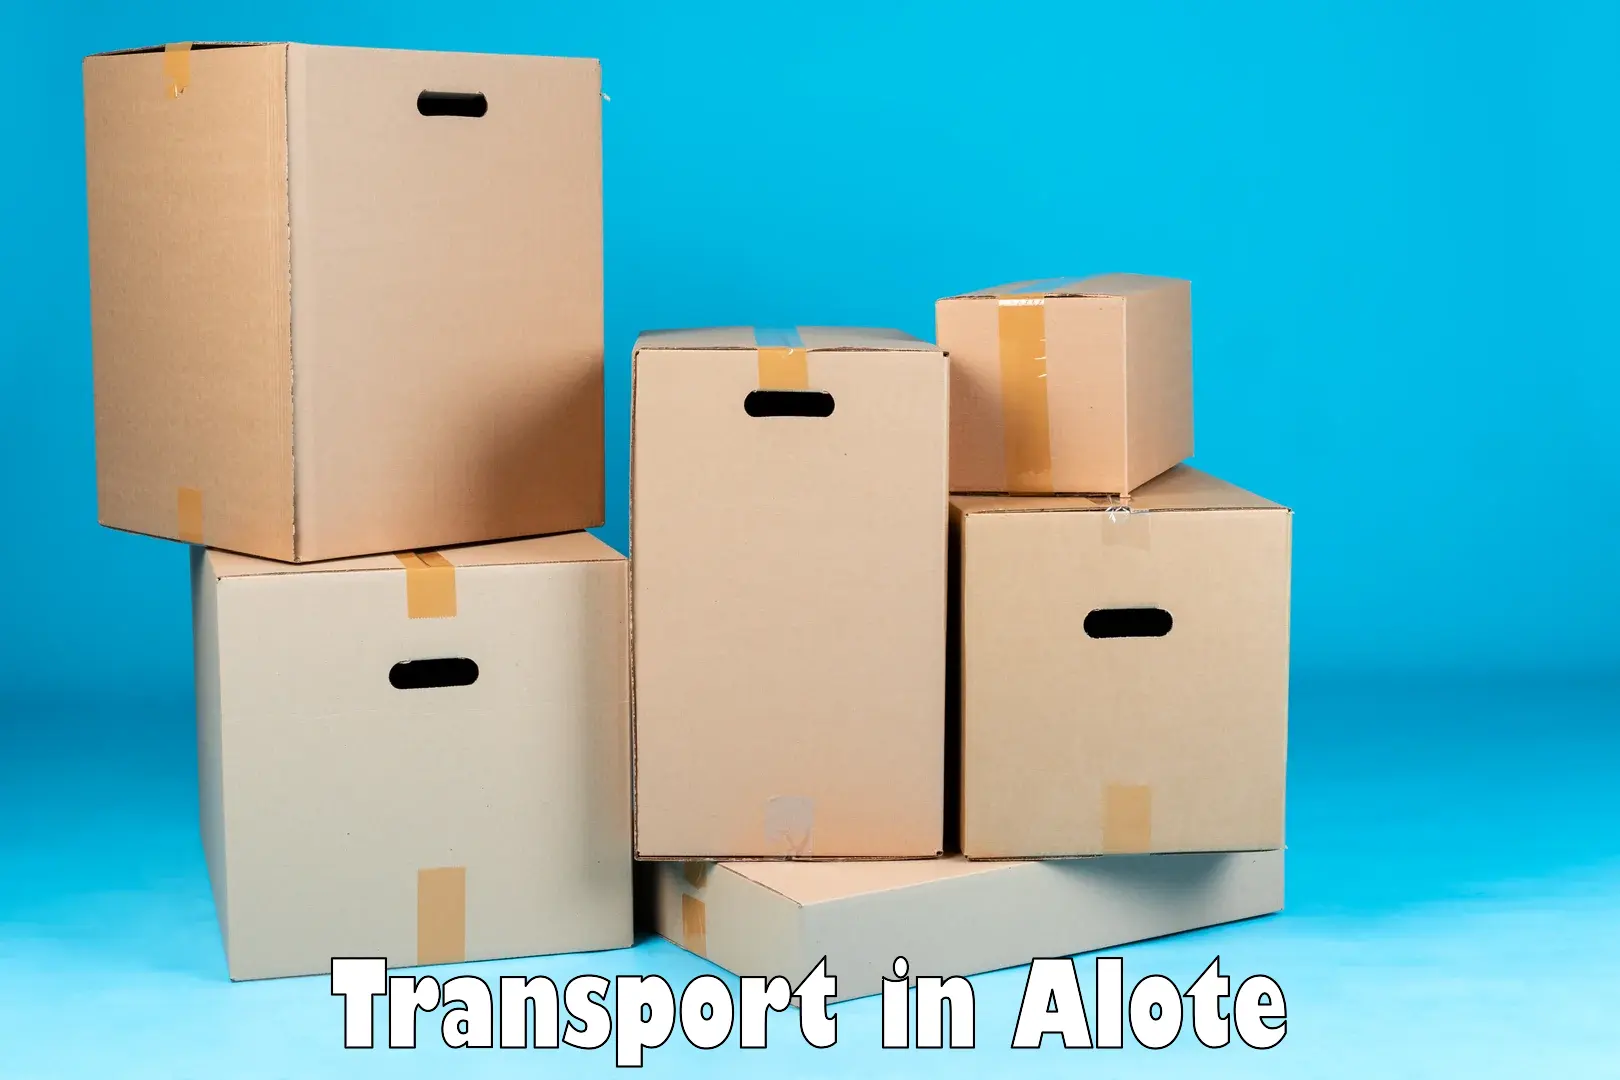 Lorry transport service in Alote